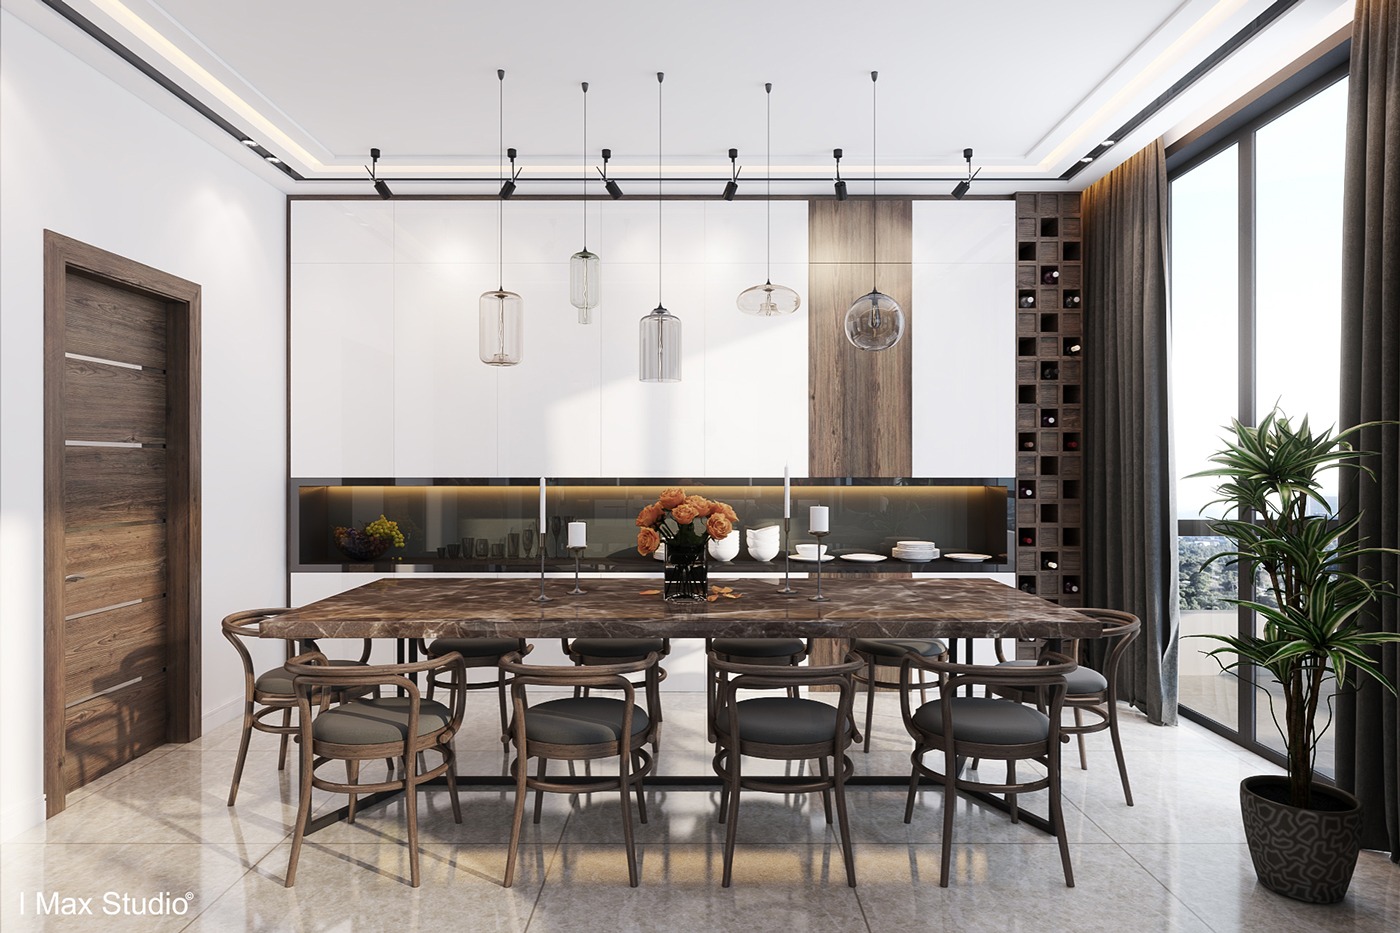 Luxurious design ideas for dining room "width =" 1400 "height =" 933 "srcset =" https://mileray.com/wp-content/uploads/2020/05/1588514206_262_7-Pretentious-Dining-Room-Interior-Design-Style.jpg 1400w, https: / /mileray.com/wp-content/uploads/2016/06/I-Max-Studio-1-300x200.jpg 300w, https://mileray.com/wp-content/uploads/2016/06/I-Max - Studio-1-768x512.jpg 768w, https://mileray.com/wp-content/uploads/2016/06/I-Max-Studio-1-1024x682.jpg 1024w, https://mileray.com/wp - content / uploads / 2016/06 / I-Max-Studio-1-696x464.jpg 696w, https://mileray.com/wp-content/uploads/2016/06/I-Max-Studio-1-1068x712. jpg 1068w, https://mileray.com/wp-content/uploads/2016/06/I-Max-Studio-1-630x420.jpg 630w "sizes =" (maximum width: 1400px) 100vw, 1400px